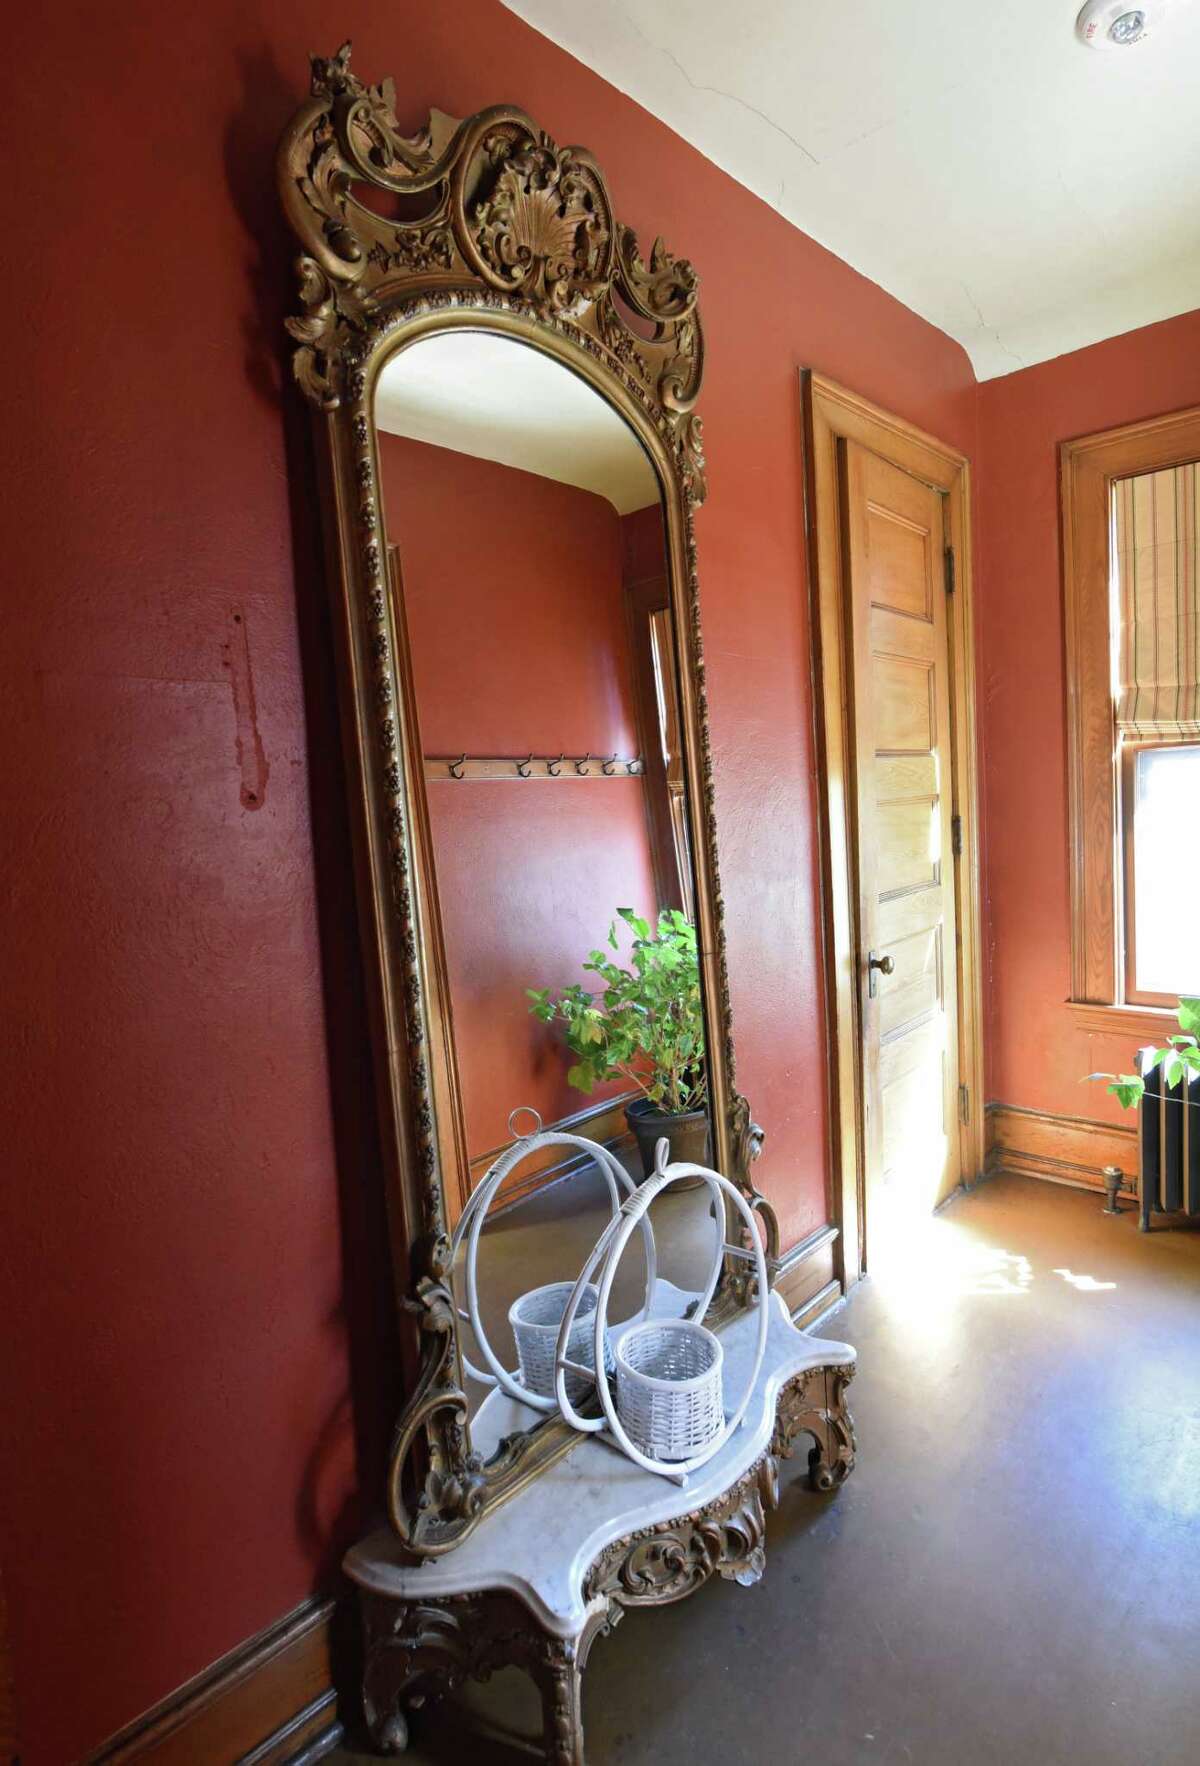 Antique mirror in The Woman's Club of Albany on Monday, July 1, 2019 in Albany, N.Y. The members are celebrating 100 years of home ownership. (Lori Van Buren/Times Union)